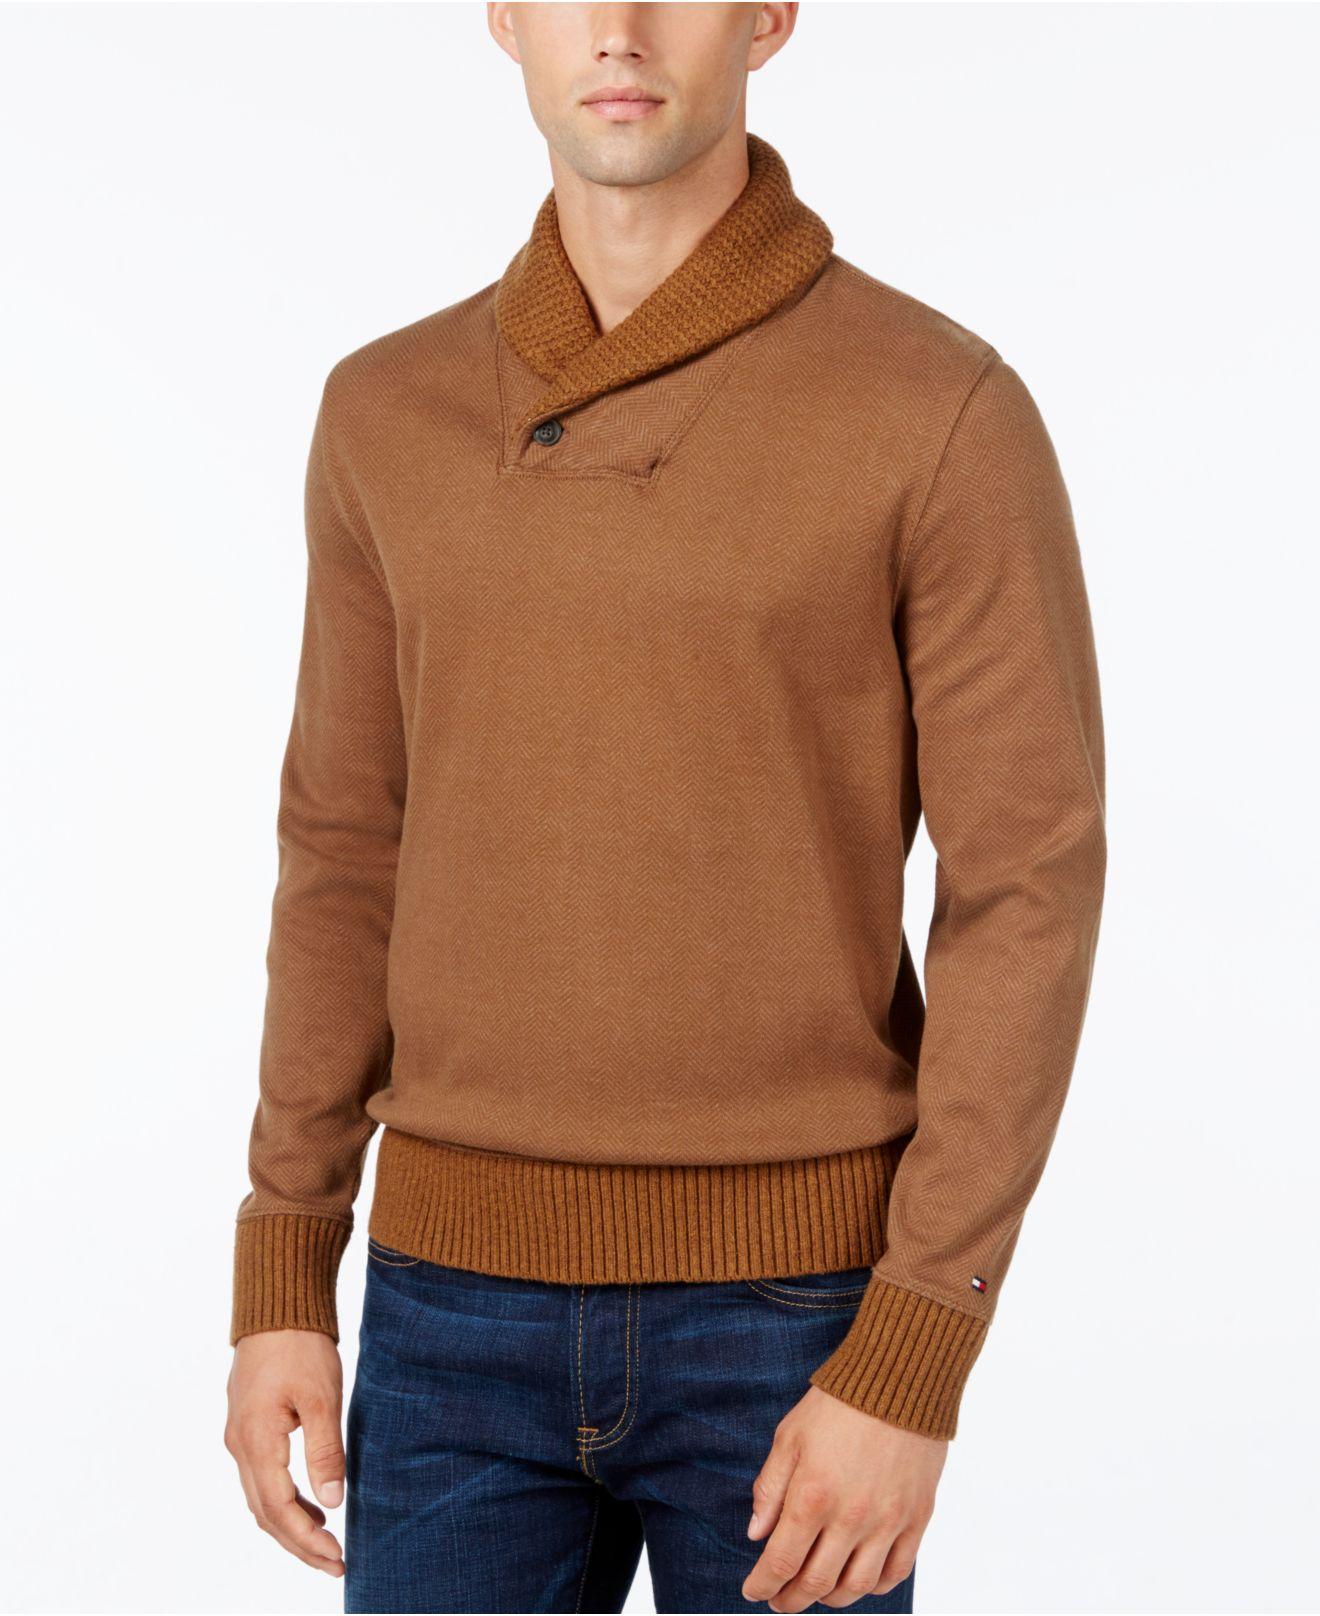 Lyst - Tommy hilfiger Men's Shawl-collar Jacquard Sweater in Brown for ...